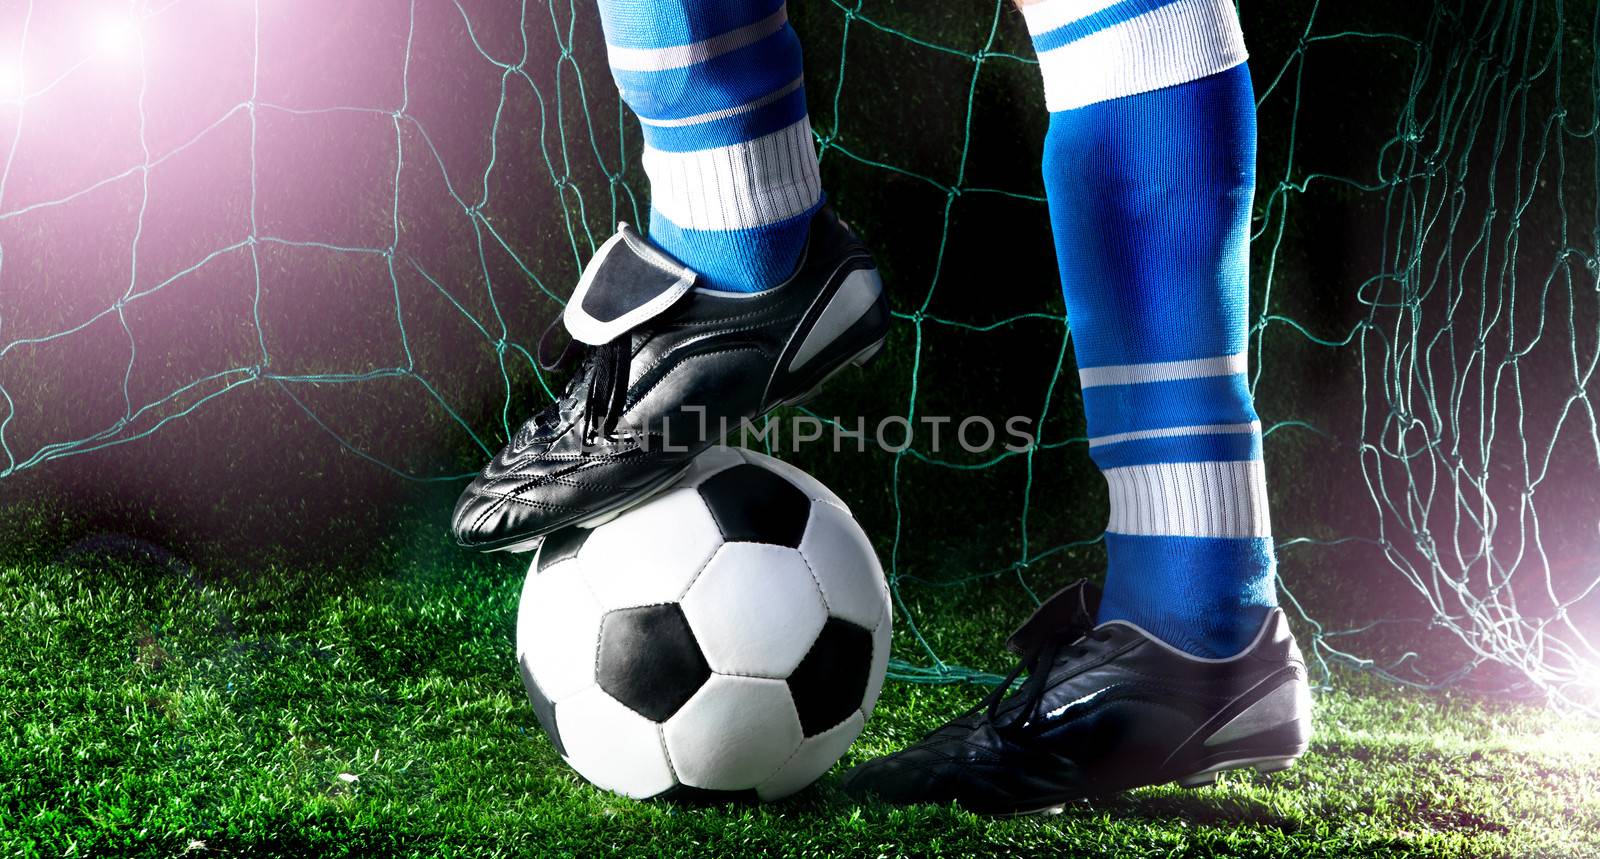 Soccer player's feet in casual pose on playing field with dark background